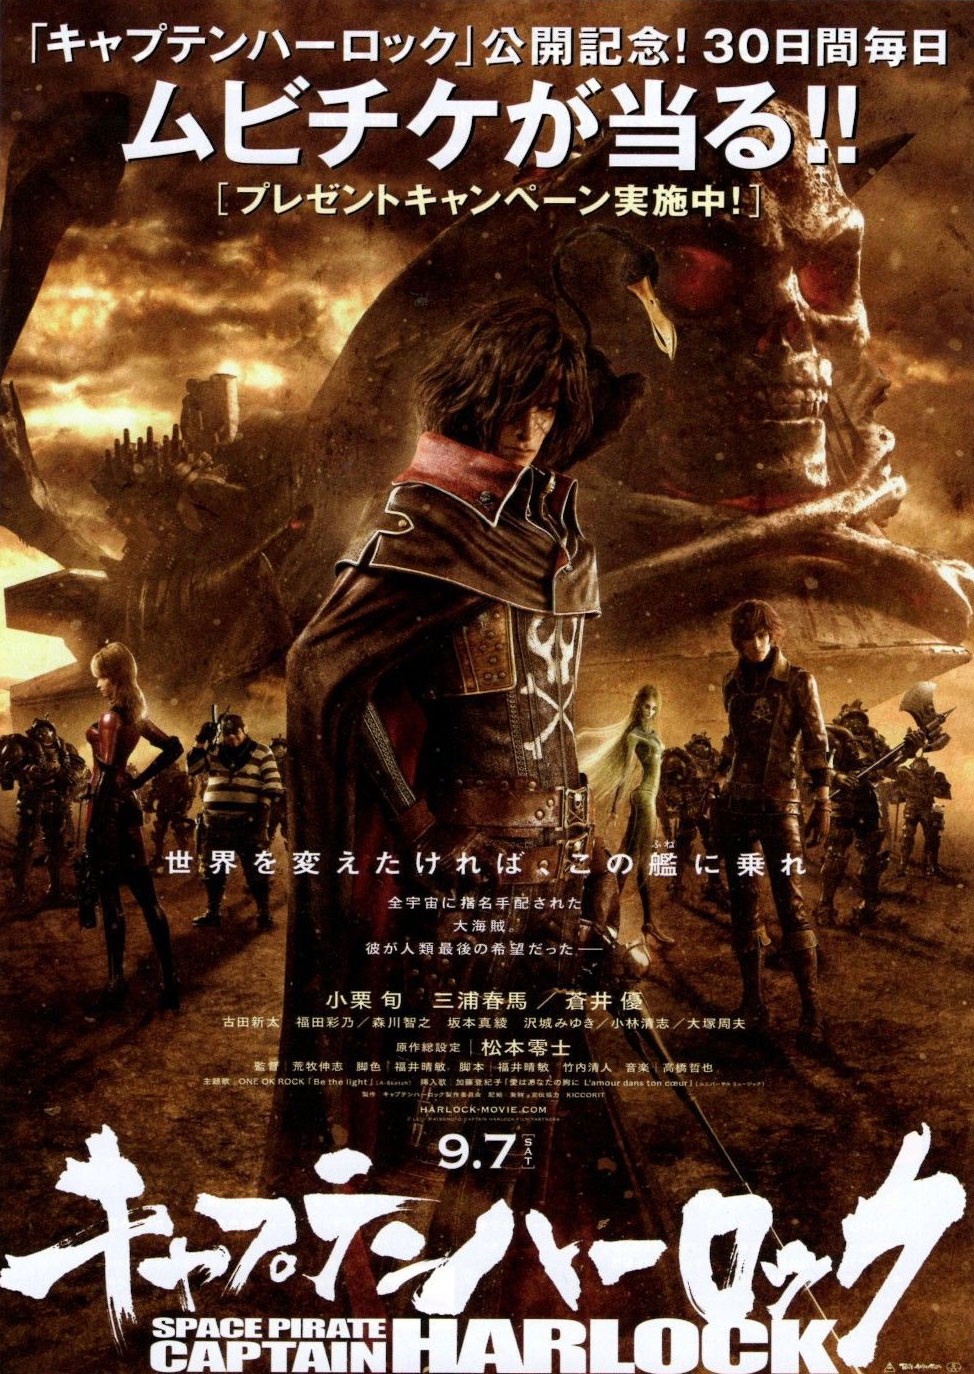 Extra Large Movie Poster Image for Space Pirate Captain Harlock (#3 of 3)